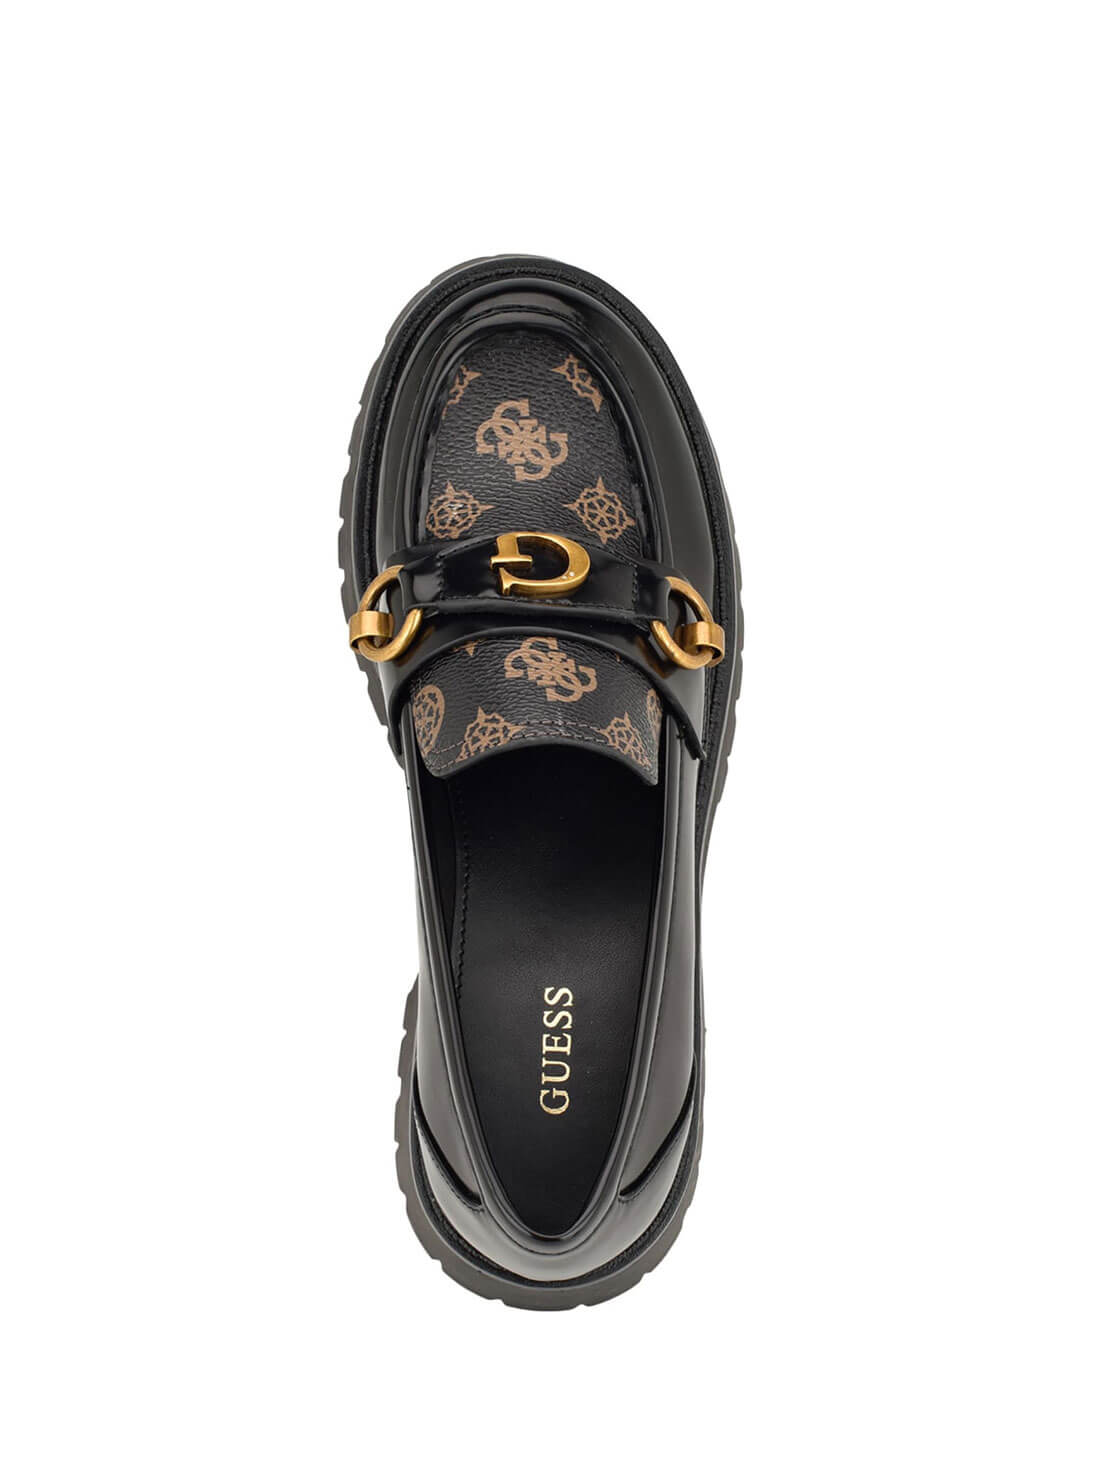 Black Logo Almost Loafers | GUESS Women's Shoes | top view